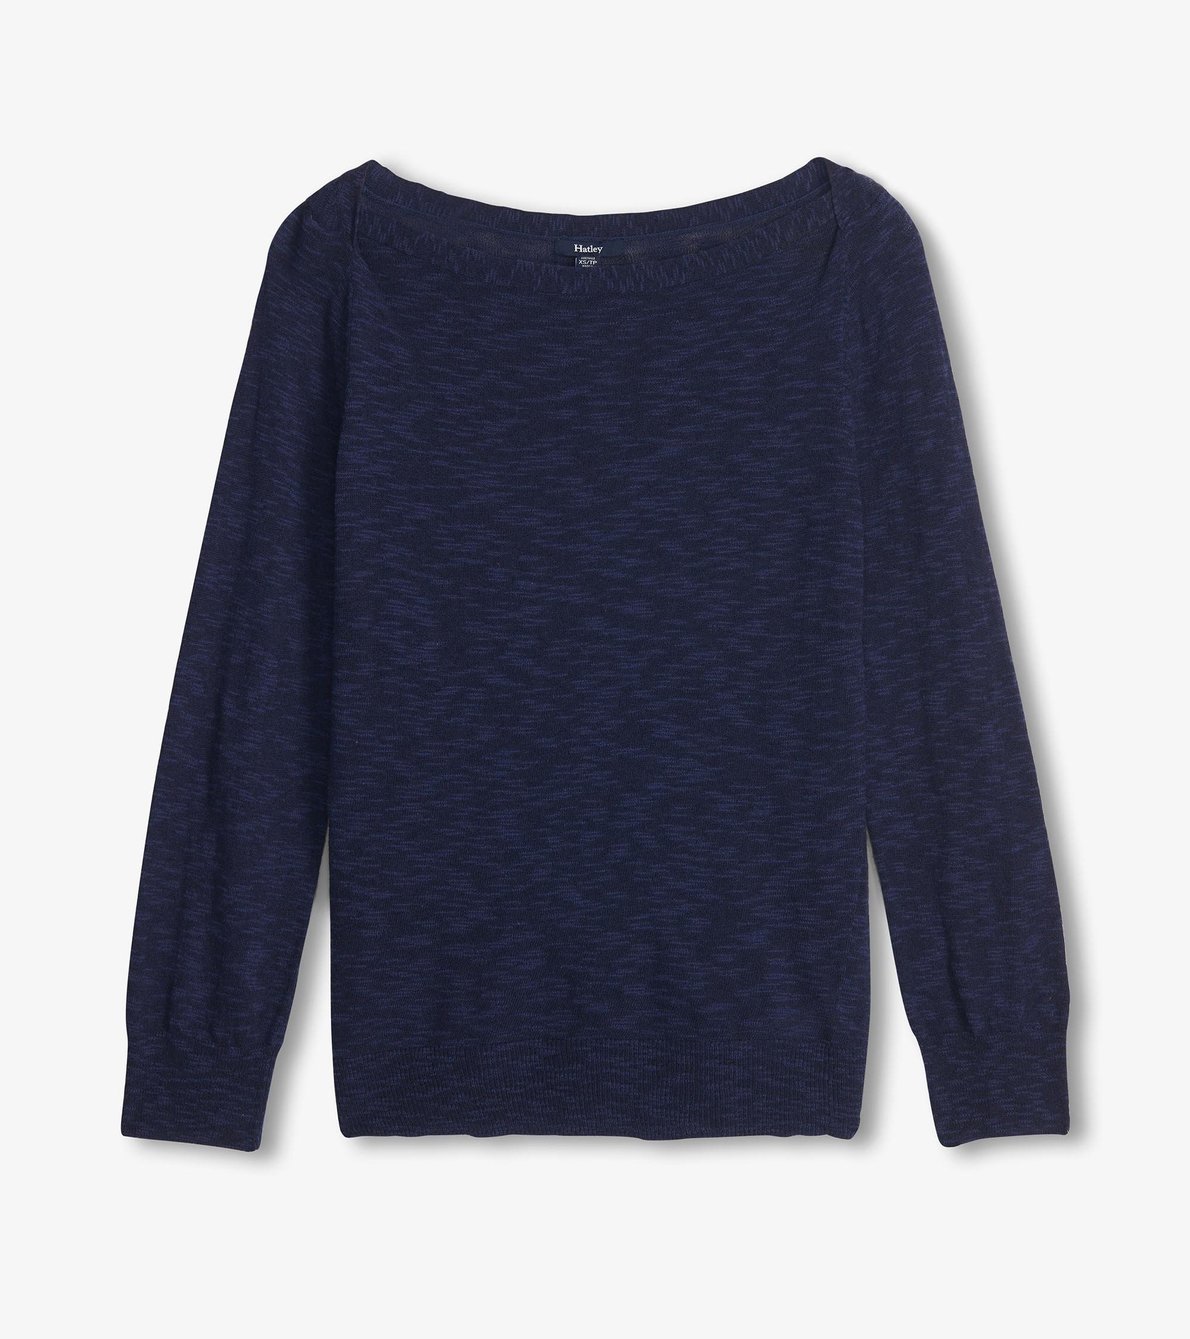 View larger image of 3/4 Sleeve Knit Breton - Navy